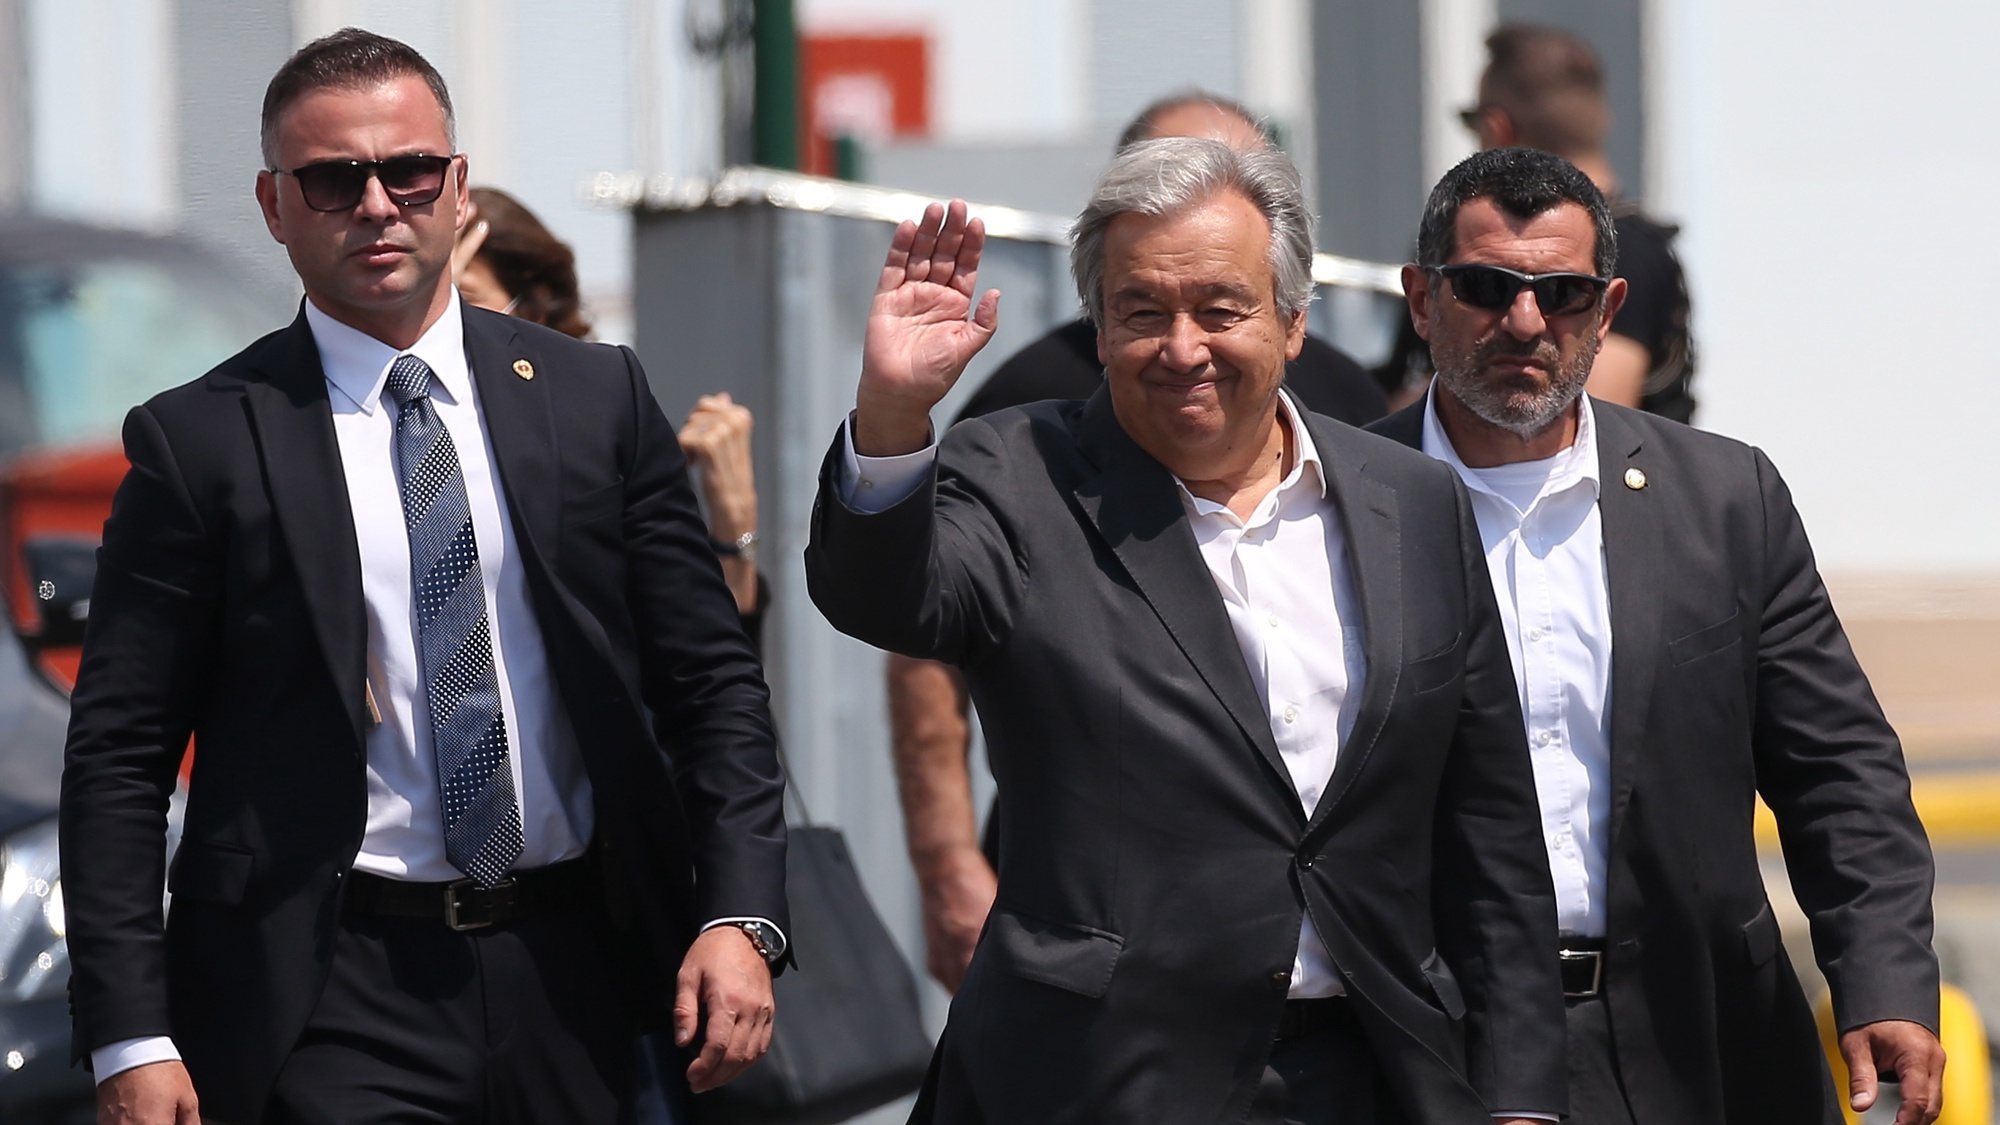 epa10130260 UN Secretary-General Antonio Guterres (C) arrives at the Zeyport to inspect a grain shipment before his Joint Coordination Center (JCC) in Istanbul, Turkey, 20 August 2022. A safe passage deal was signed between Ukraine and Russia to export Ukrainian grain on 22 July in Istanbul.  EPA/ERDEM SAHIN